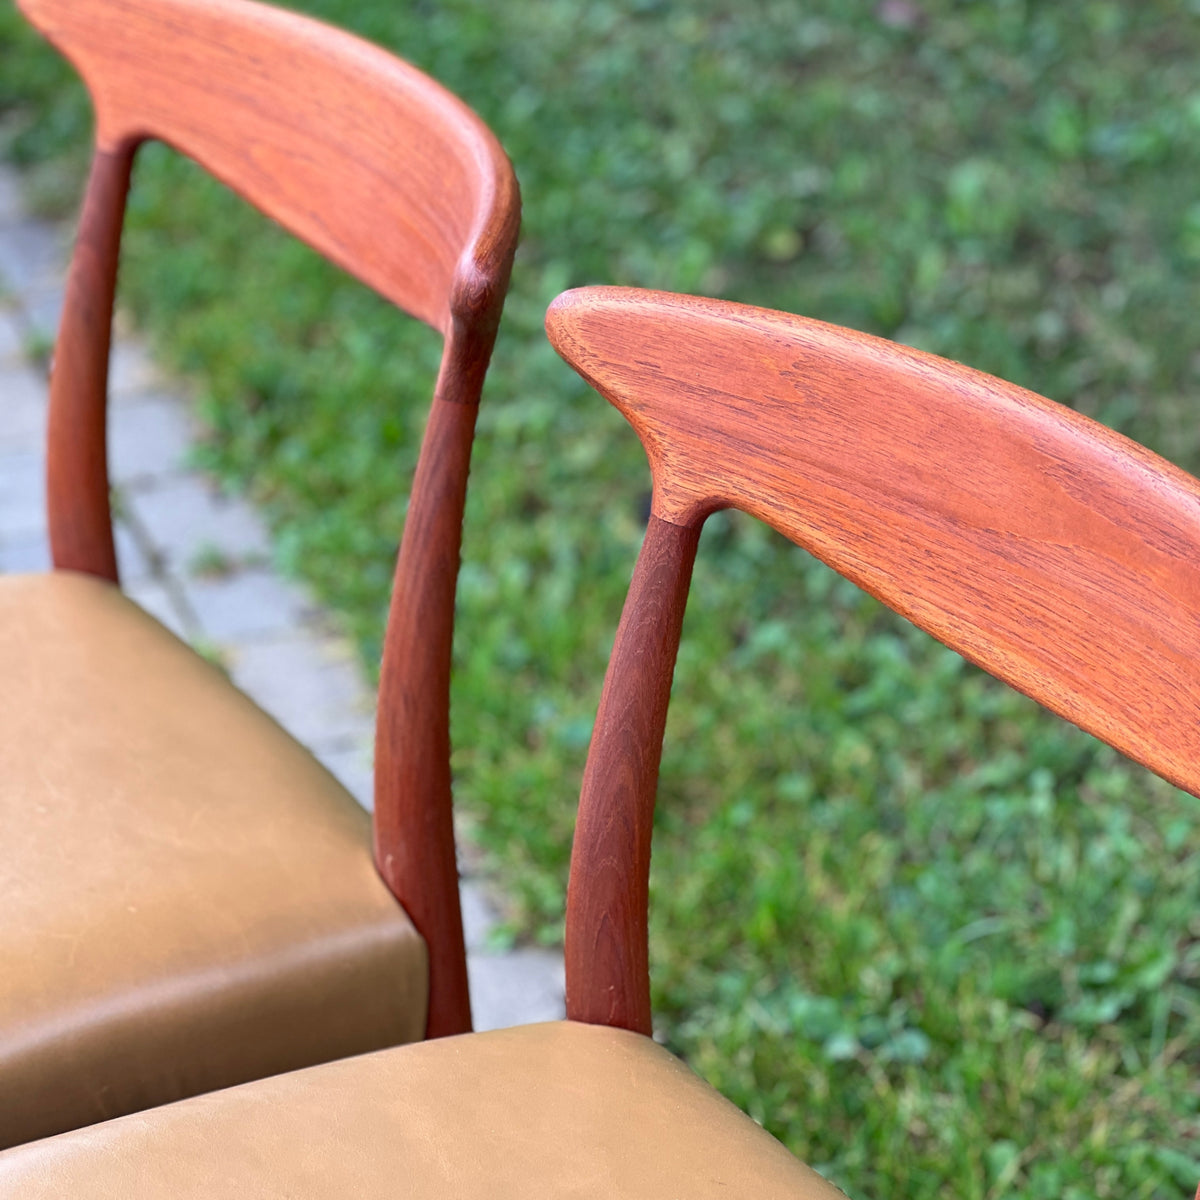 Set of T301 Dining Chairs by Arne Hovmand Olsen